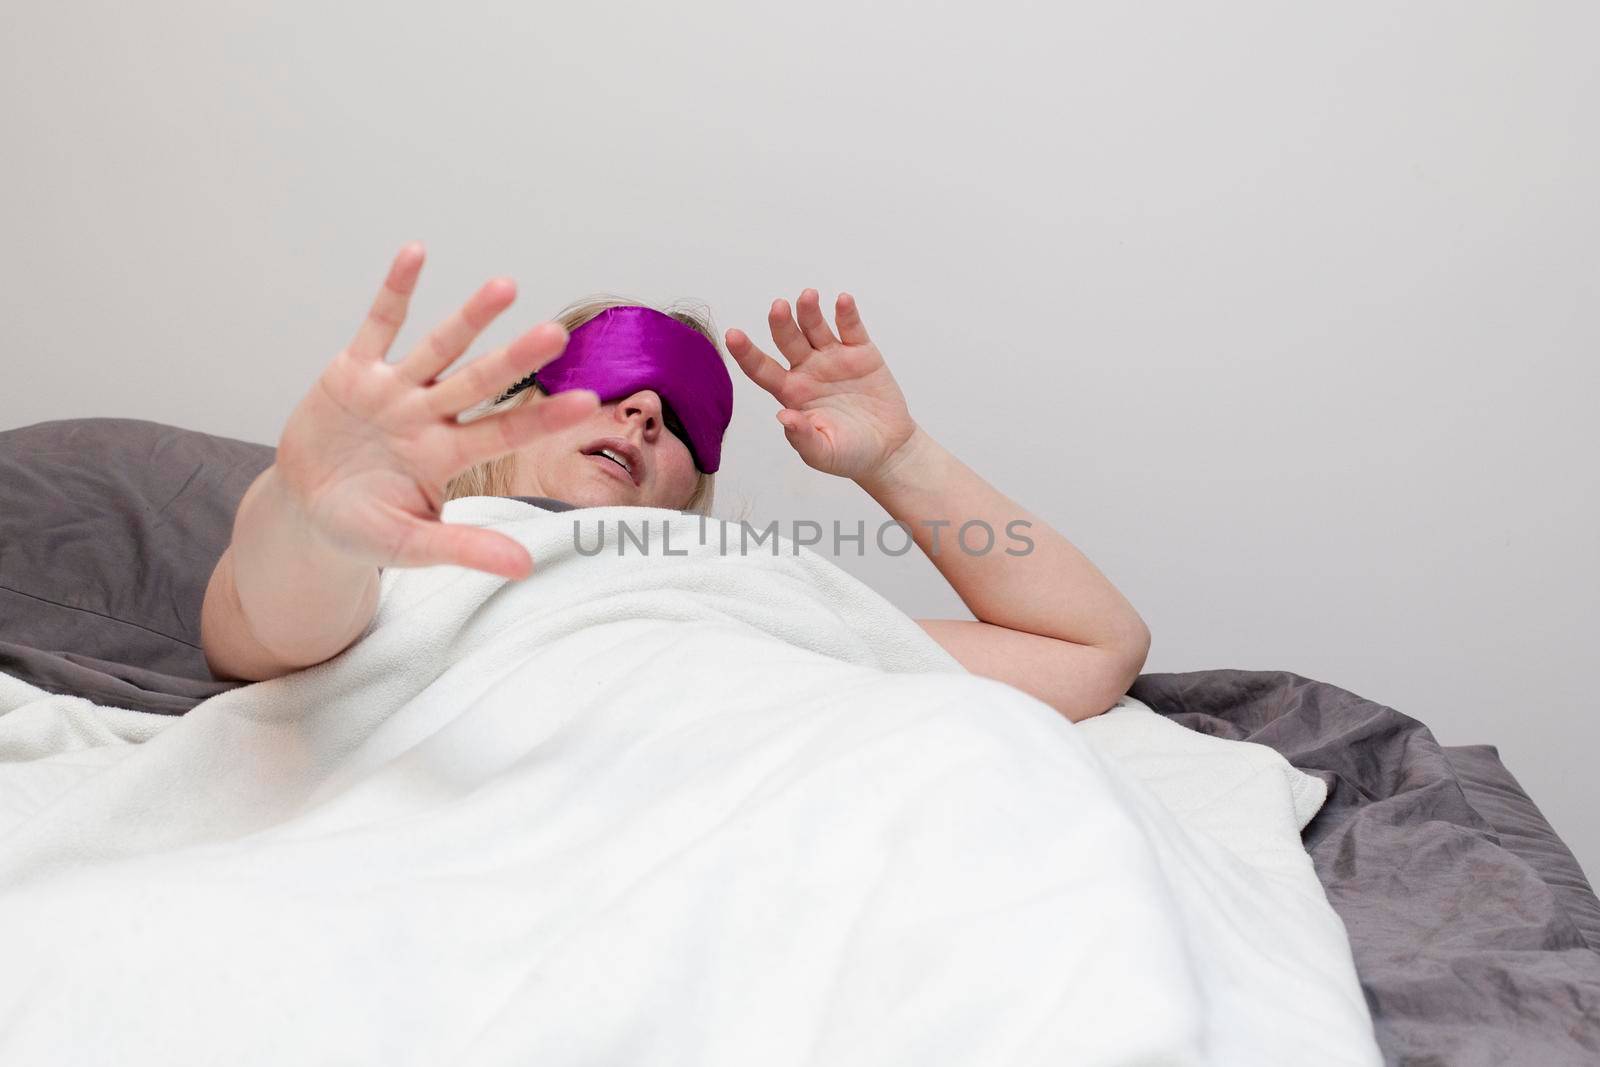 Woman in bed with hand out, telling you to back off and leave her alone